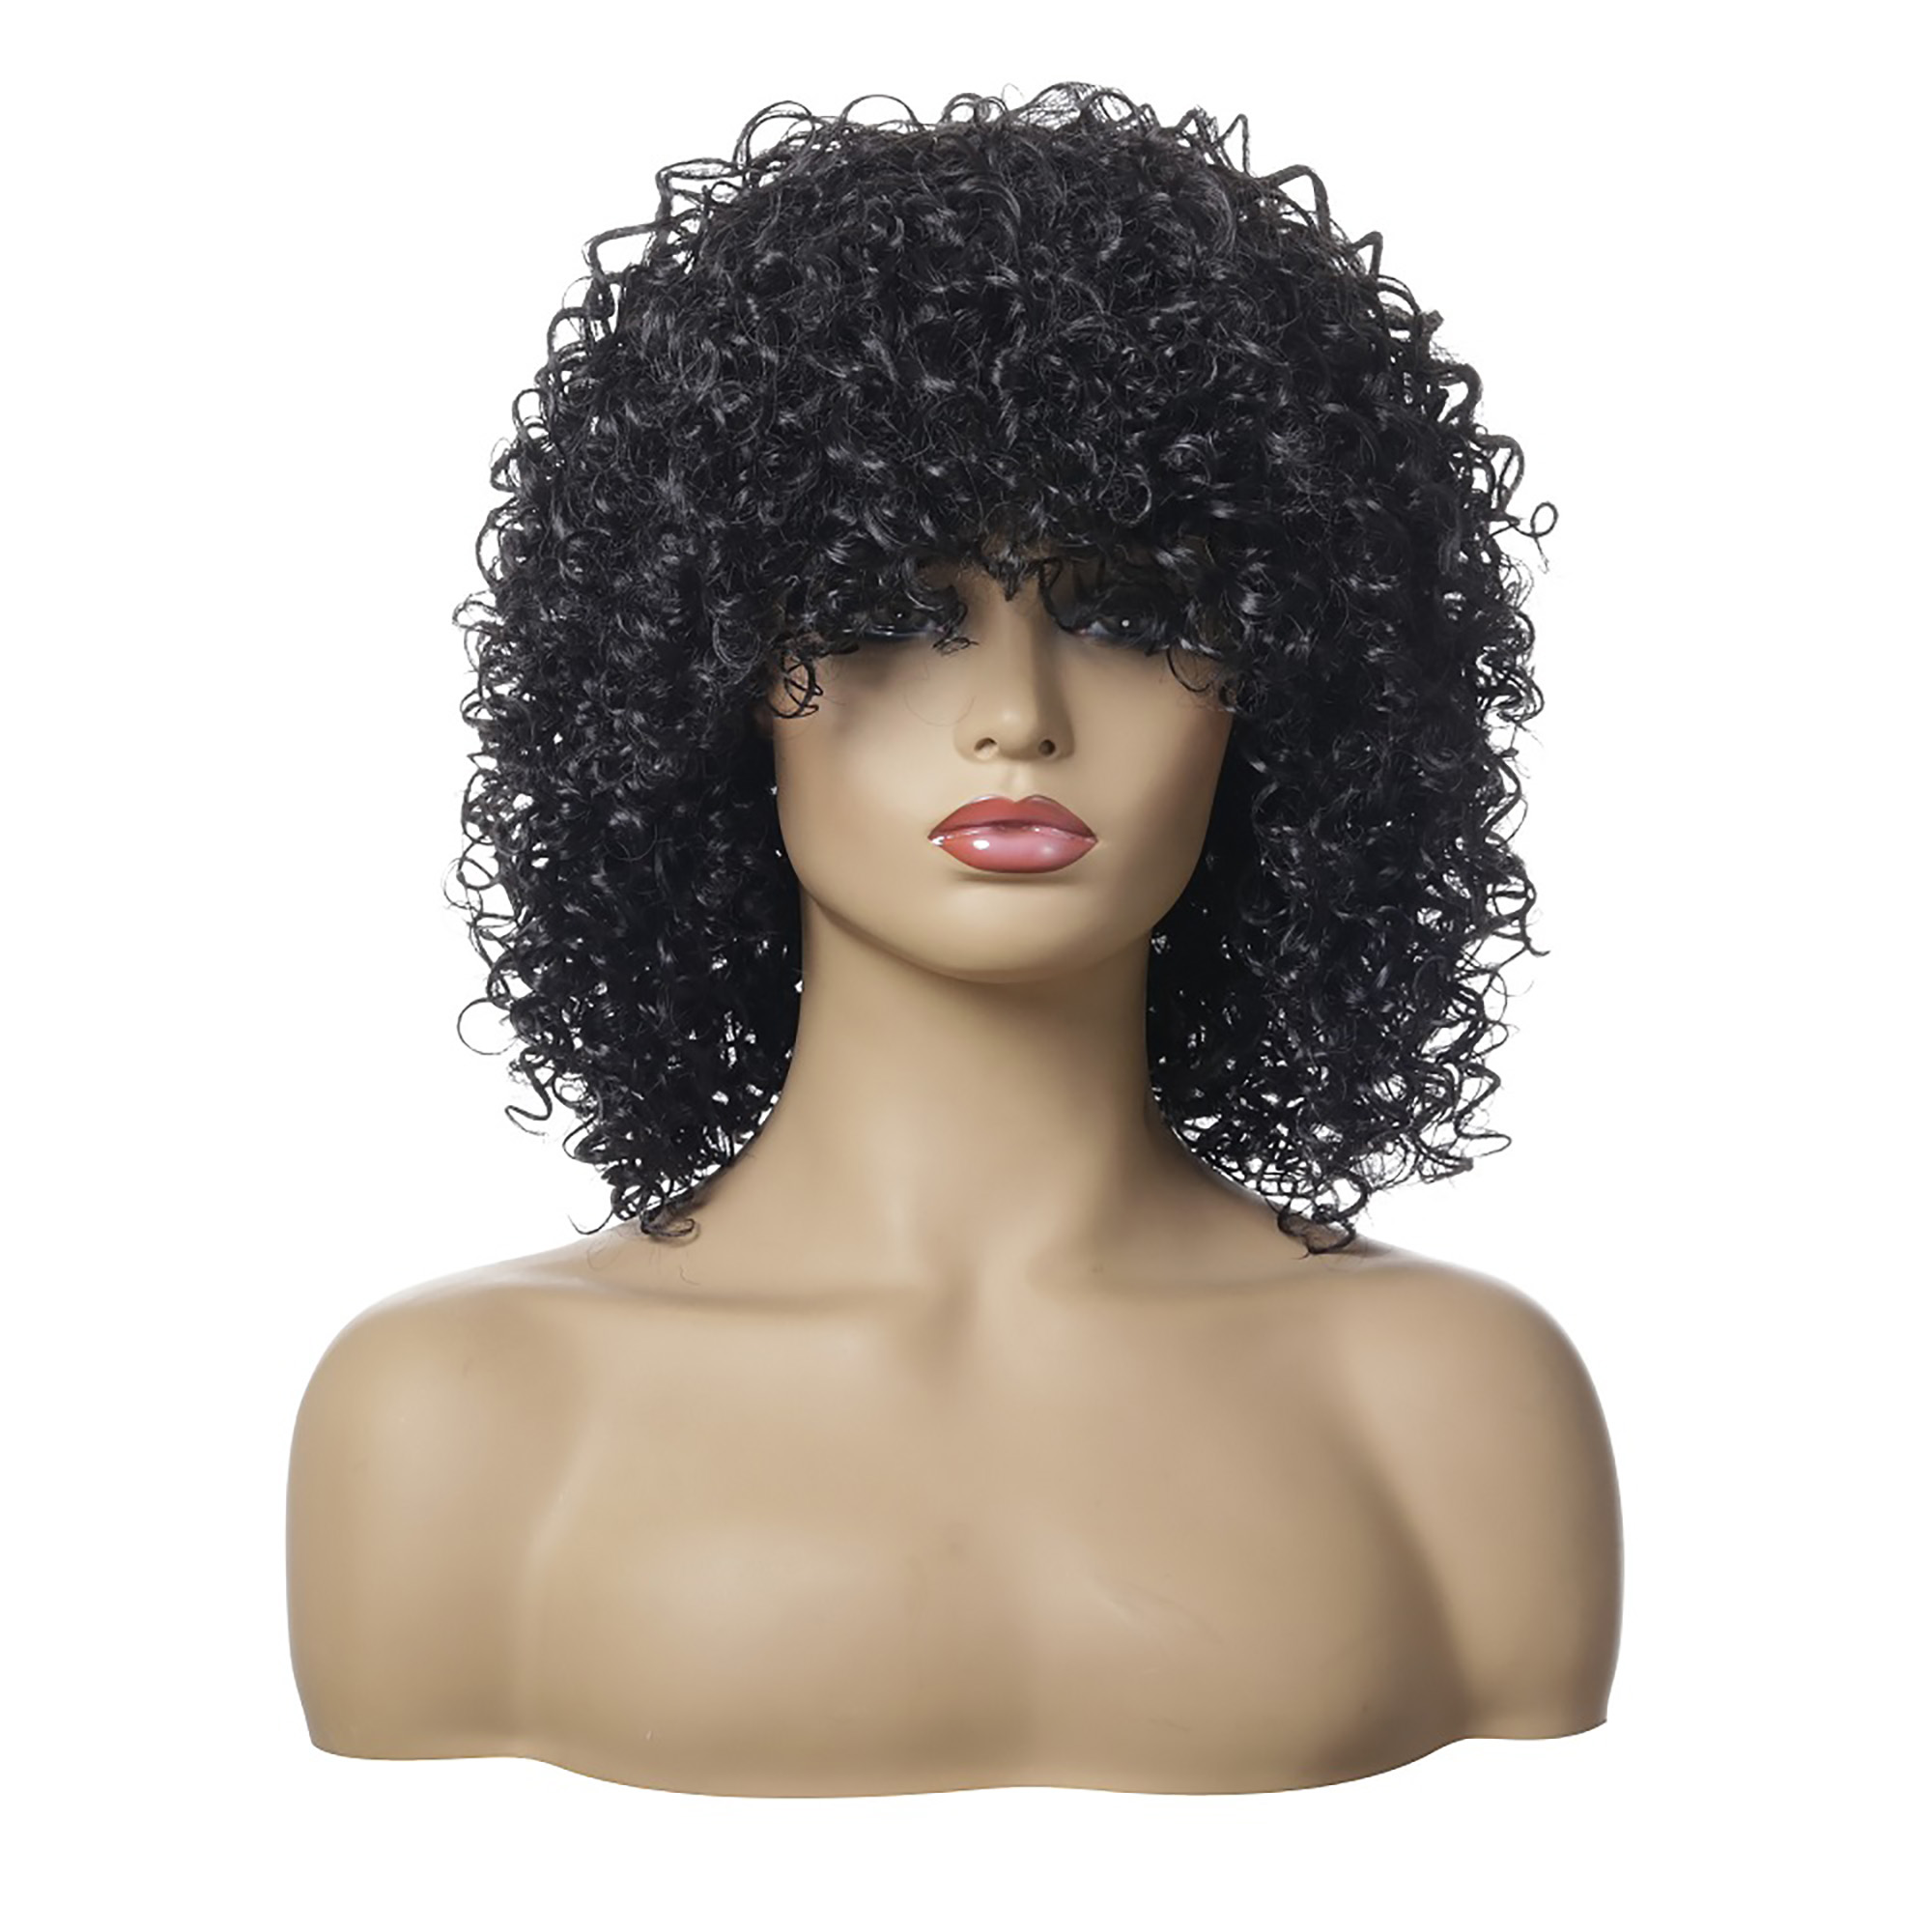 Women Short Natur Curly Wig Synthetic Full Hair Wigs With Bangs Cosplay Party Ebay